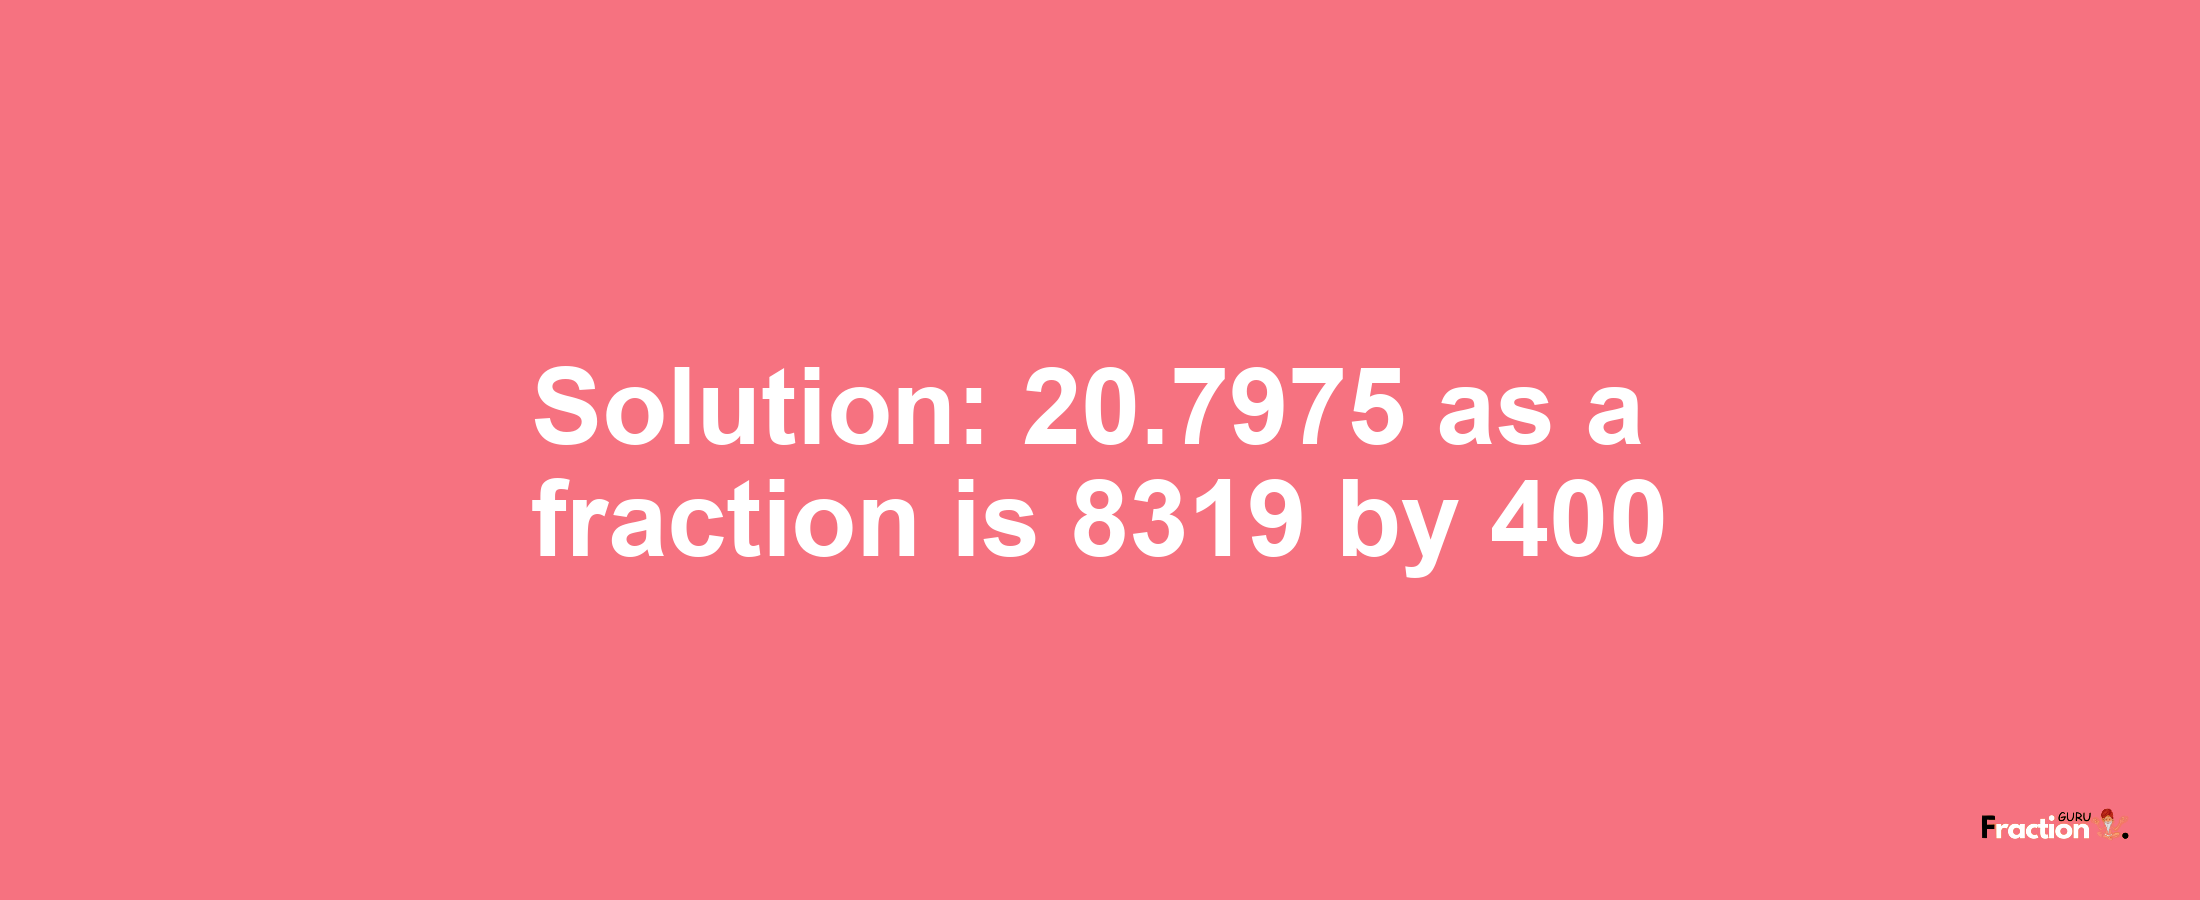 Solution:20.7975 as a fraction is 8319/400